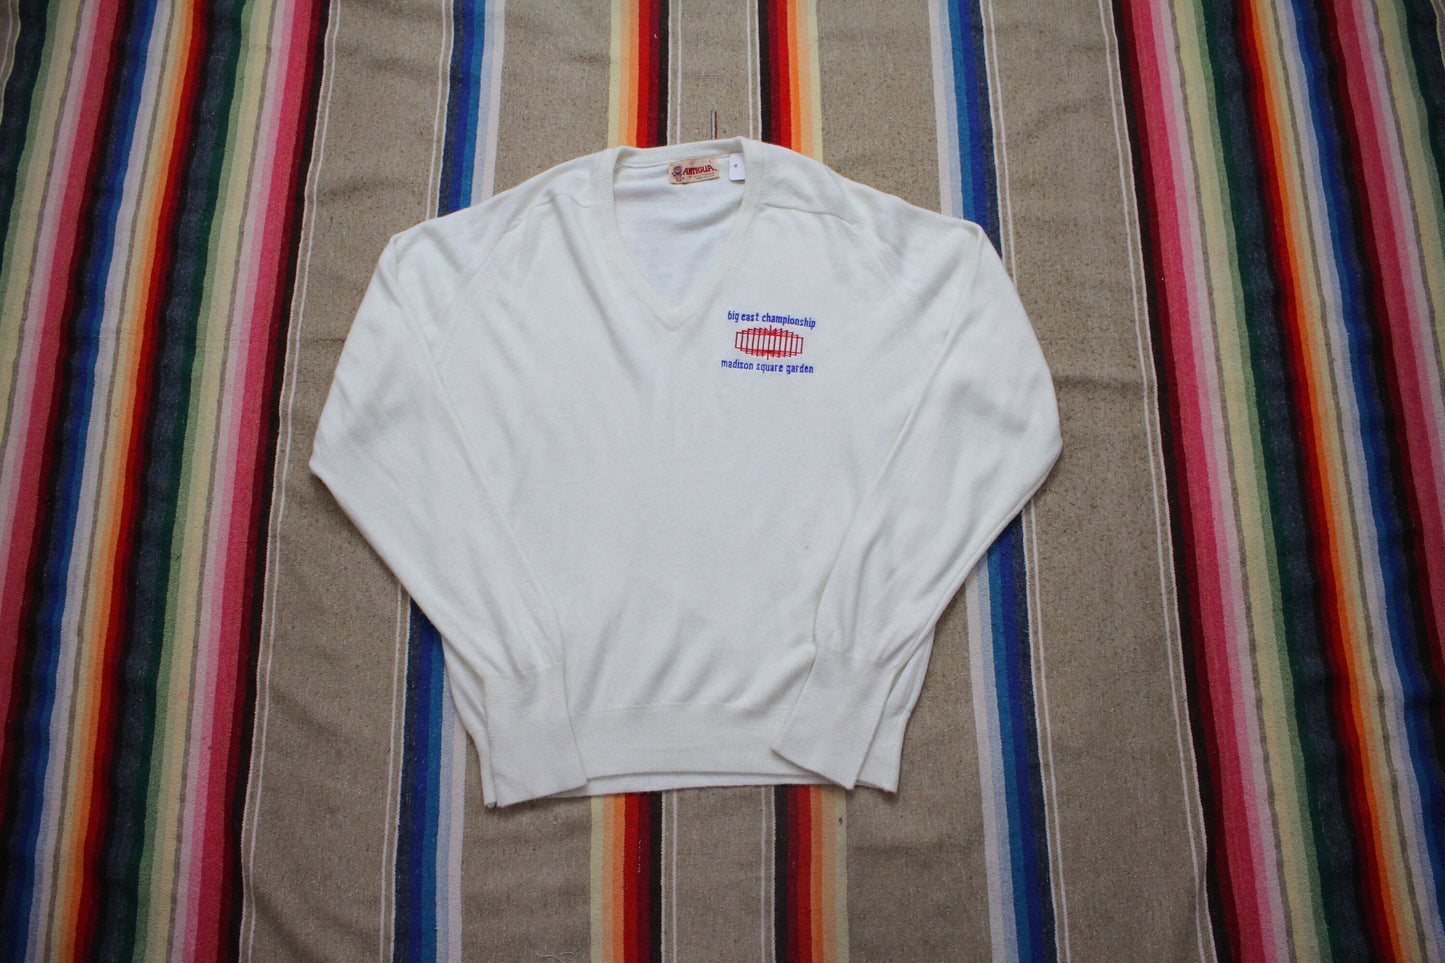 1980s Antigua of Scottsdale Big East Championship Madison Square Garden V-Neck Sweater Made in USA Size L